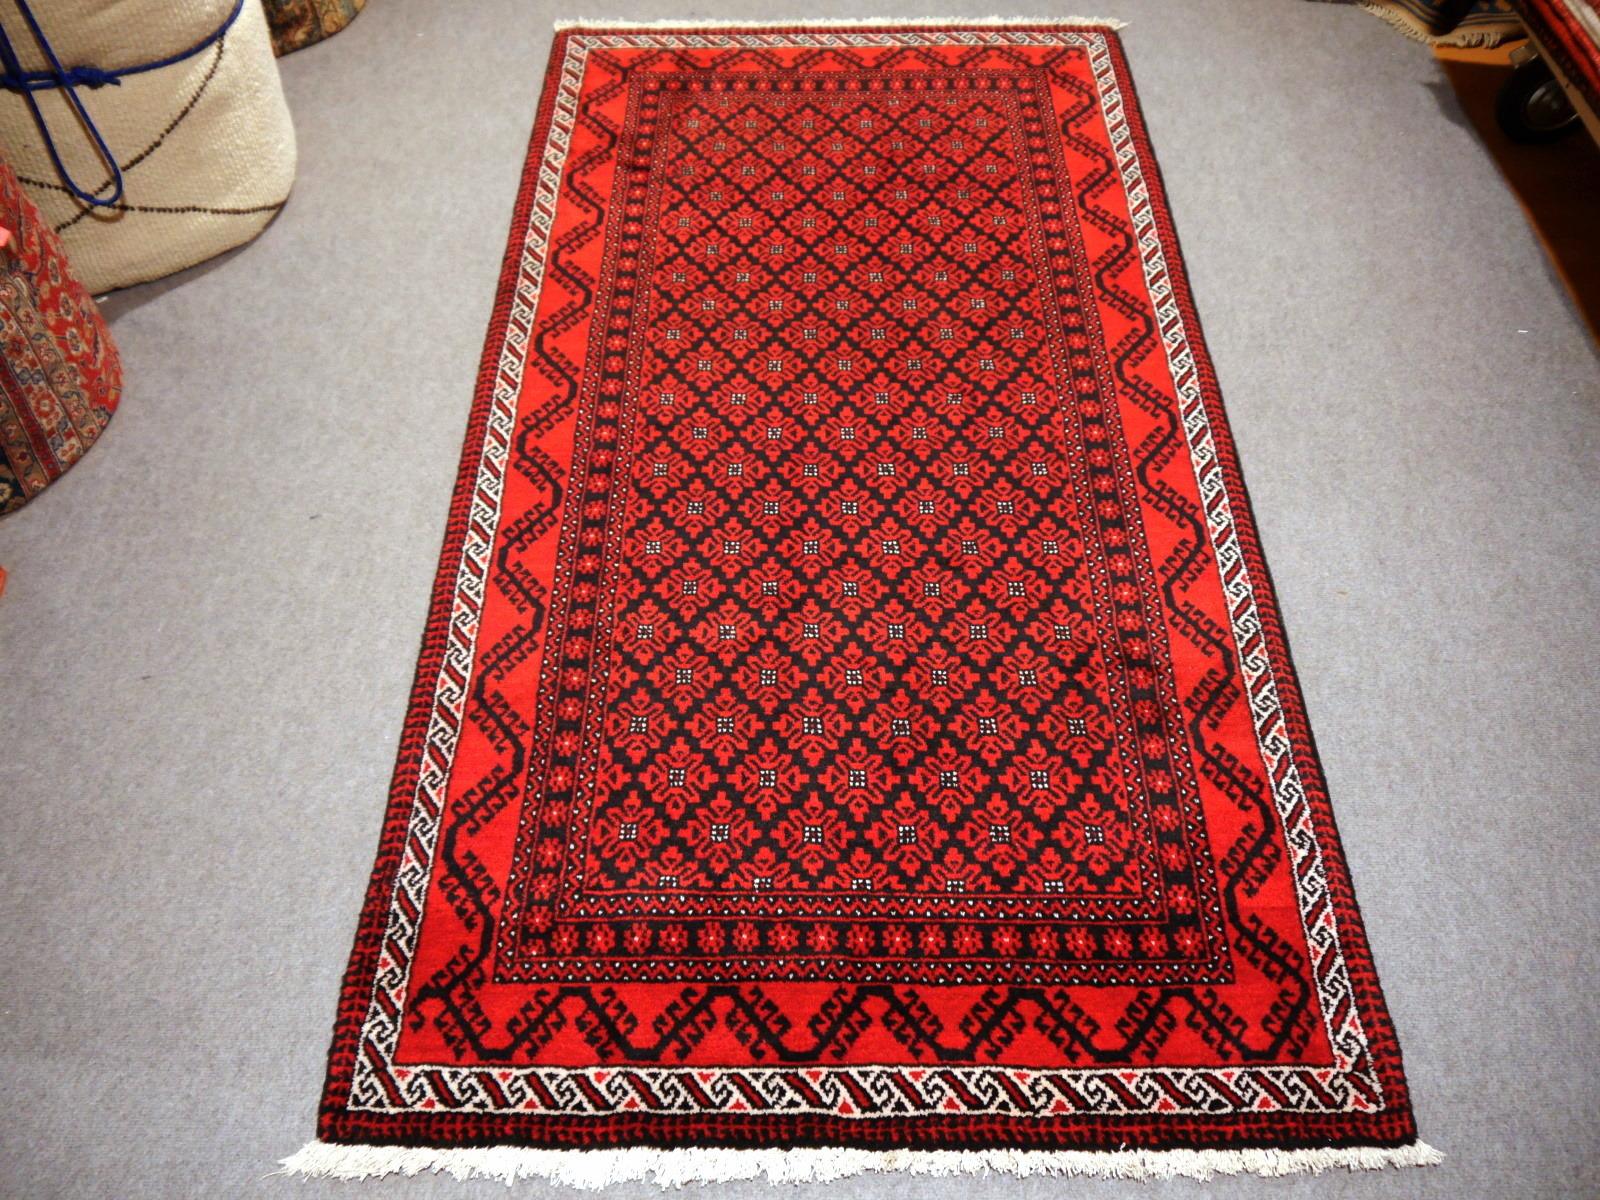 Vintage tribal rug in black, red and ivory.

The Turkmen or Turkoman people are settling in villages in Afghanistan and Turkmenistan near the Persian border. Their origin is tribal nomadic, but most members of the tribes have settled in villages